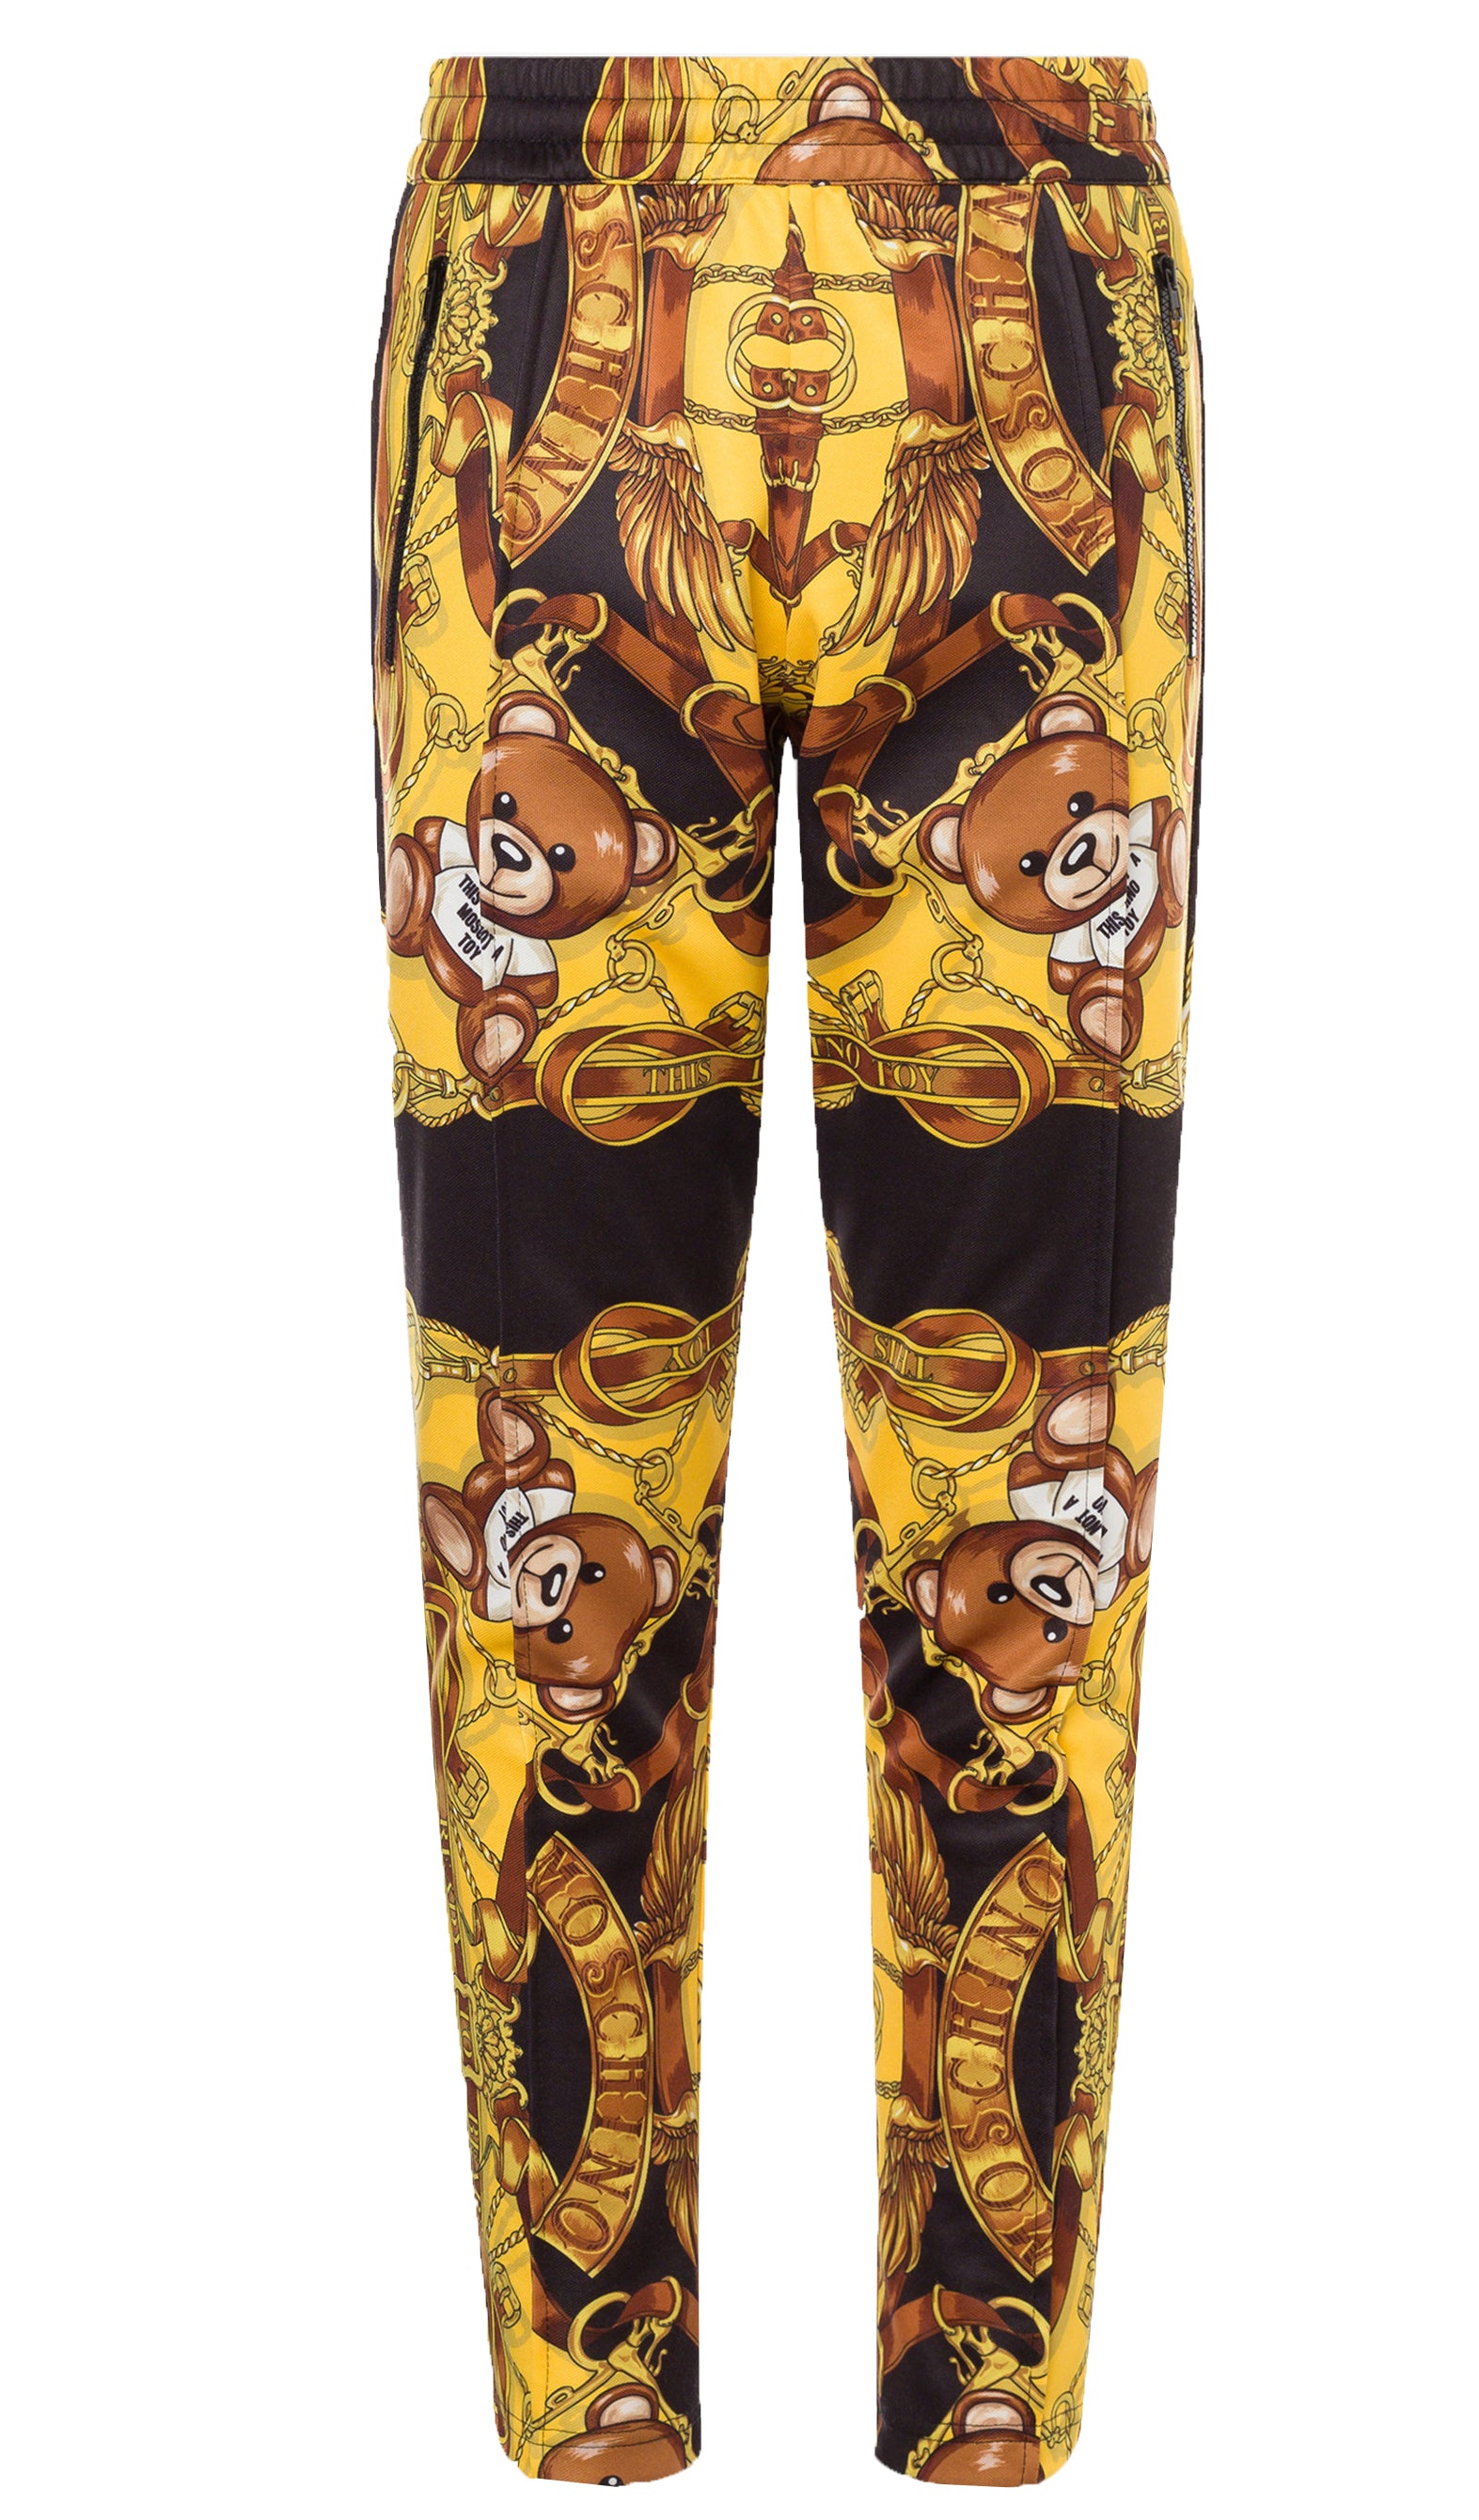 Moschino All Over Printed Pants - Black and Gold